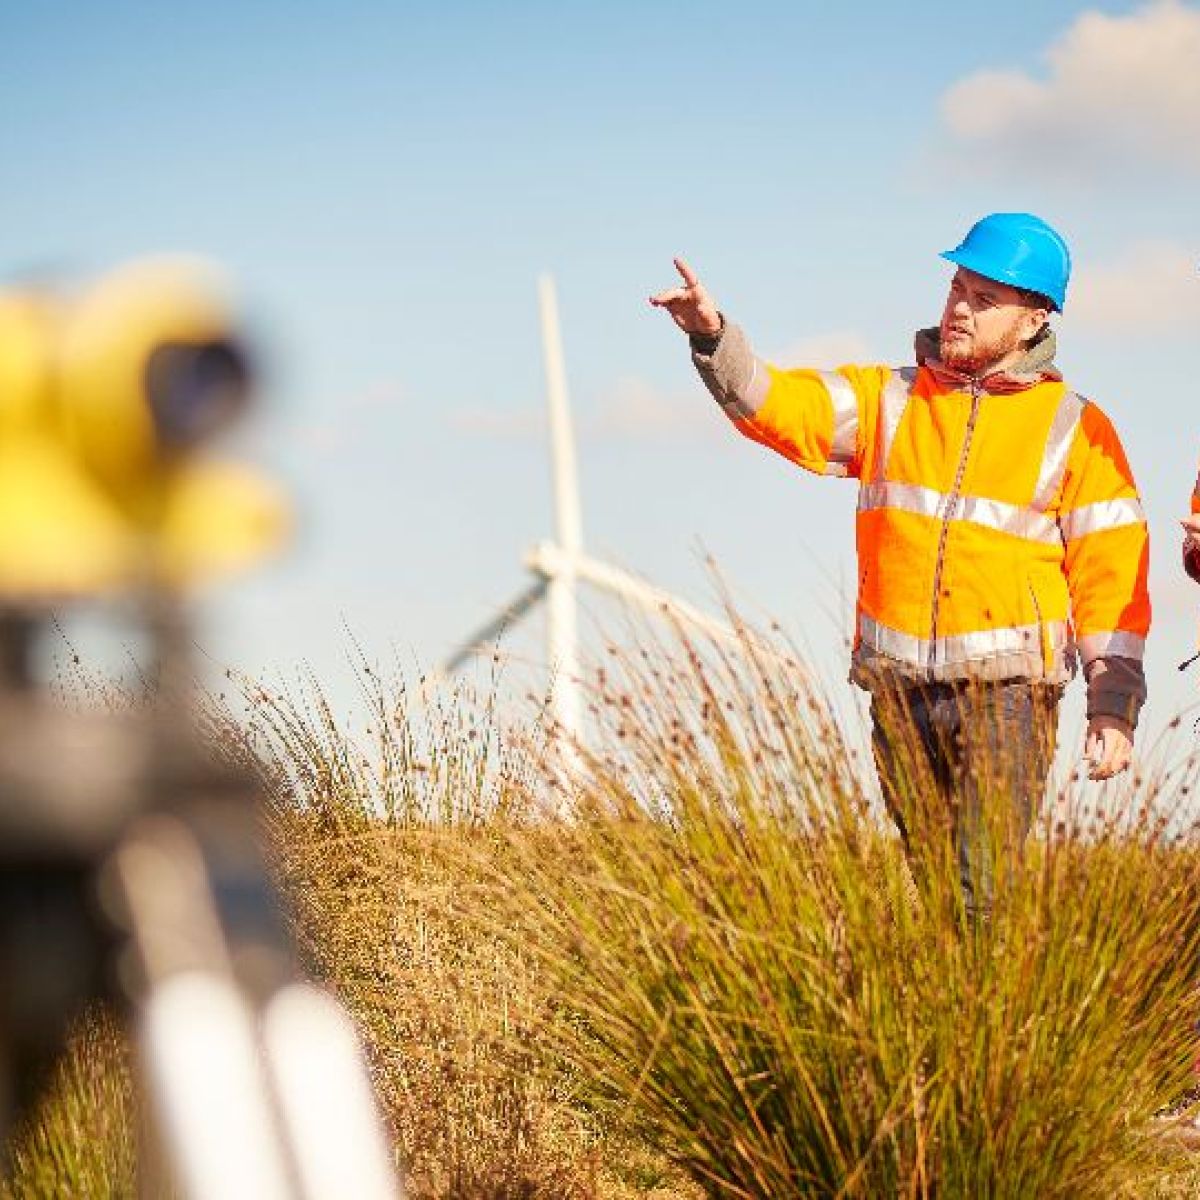 A Career In Surveying Could Be Your Gateway To The World - 